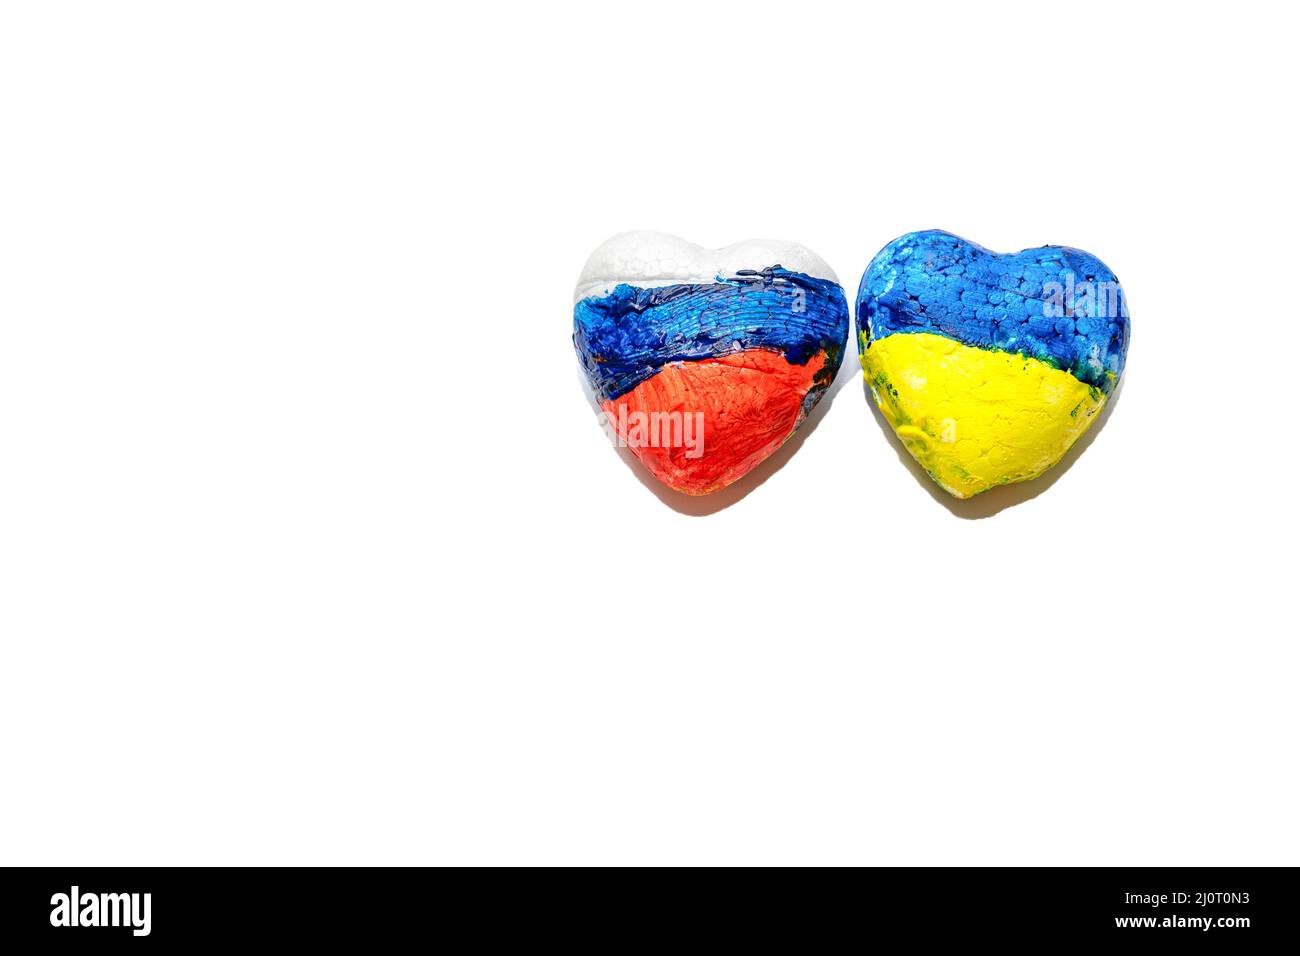 National flags of Ukraine and Russia on heart shape. Creative isolated image about peace between Ukrainian and Russian people, talks, Negotiation. Stock Photo